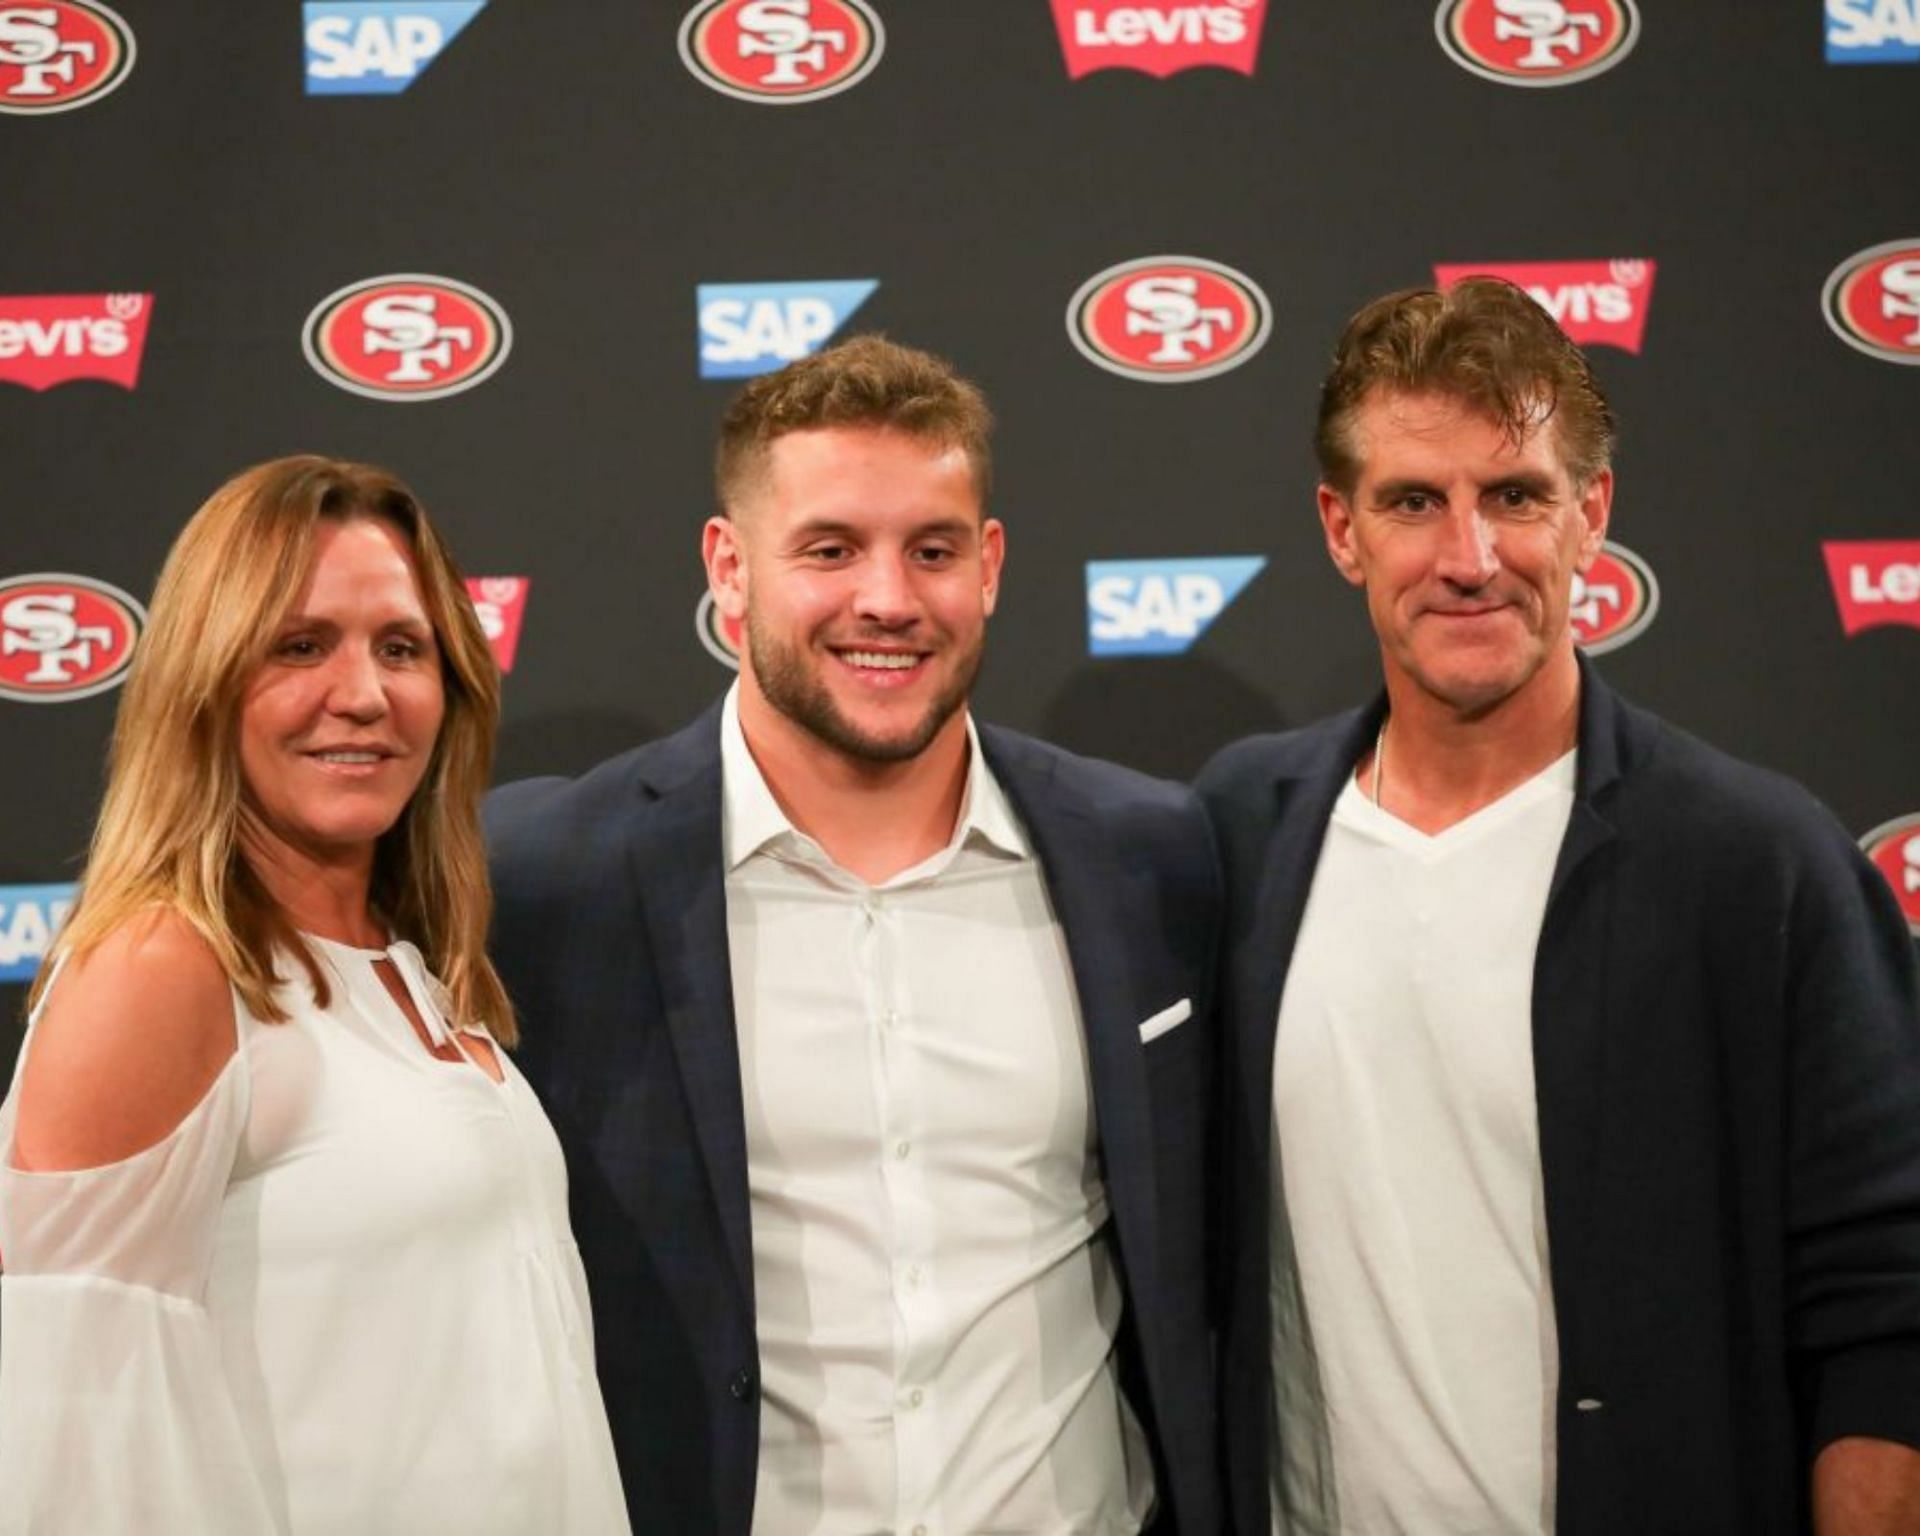 Nick Bosa and Joey Bosa talk about brotherhood, growing up in